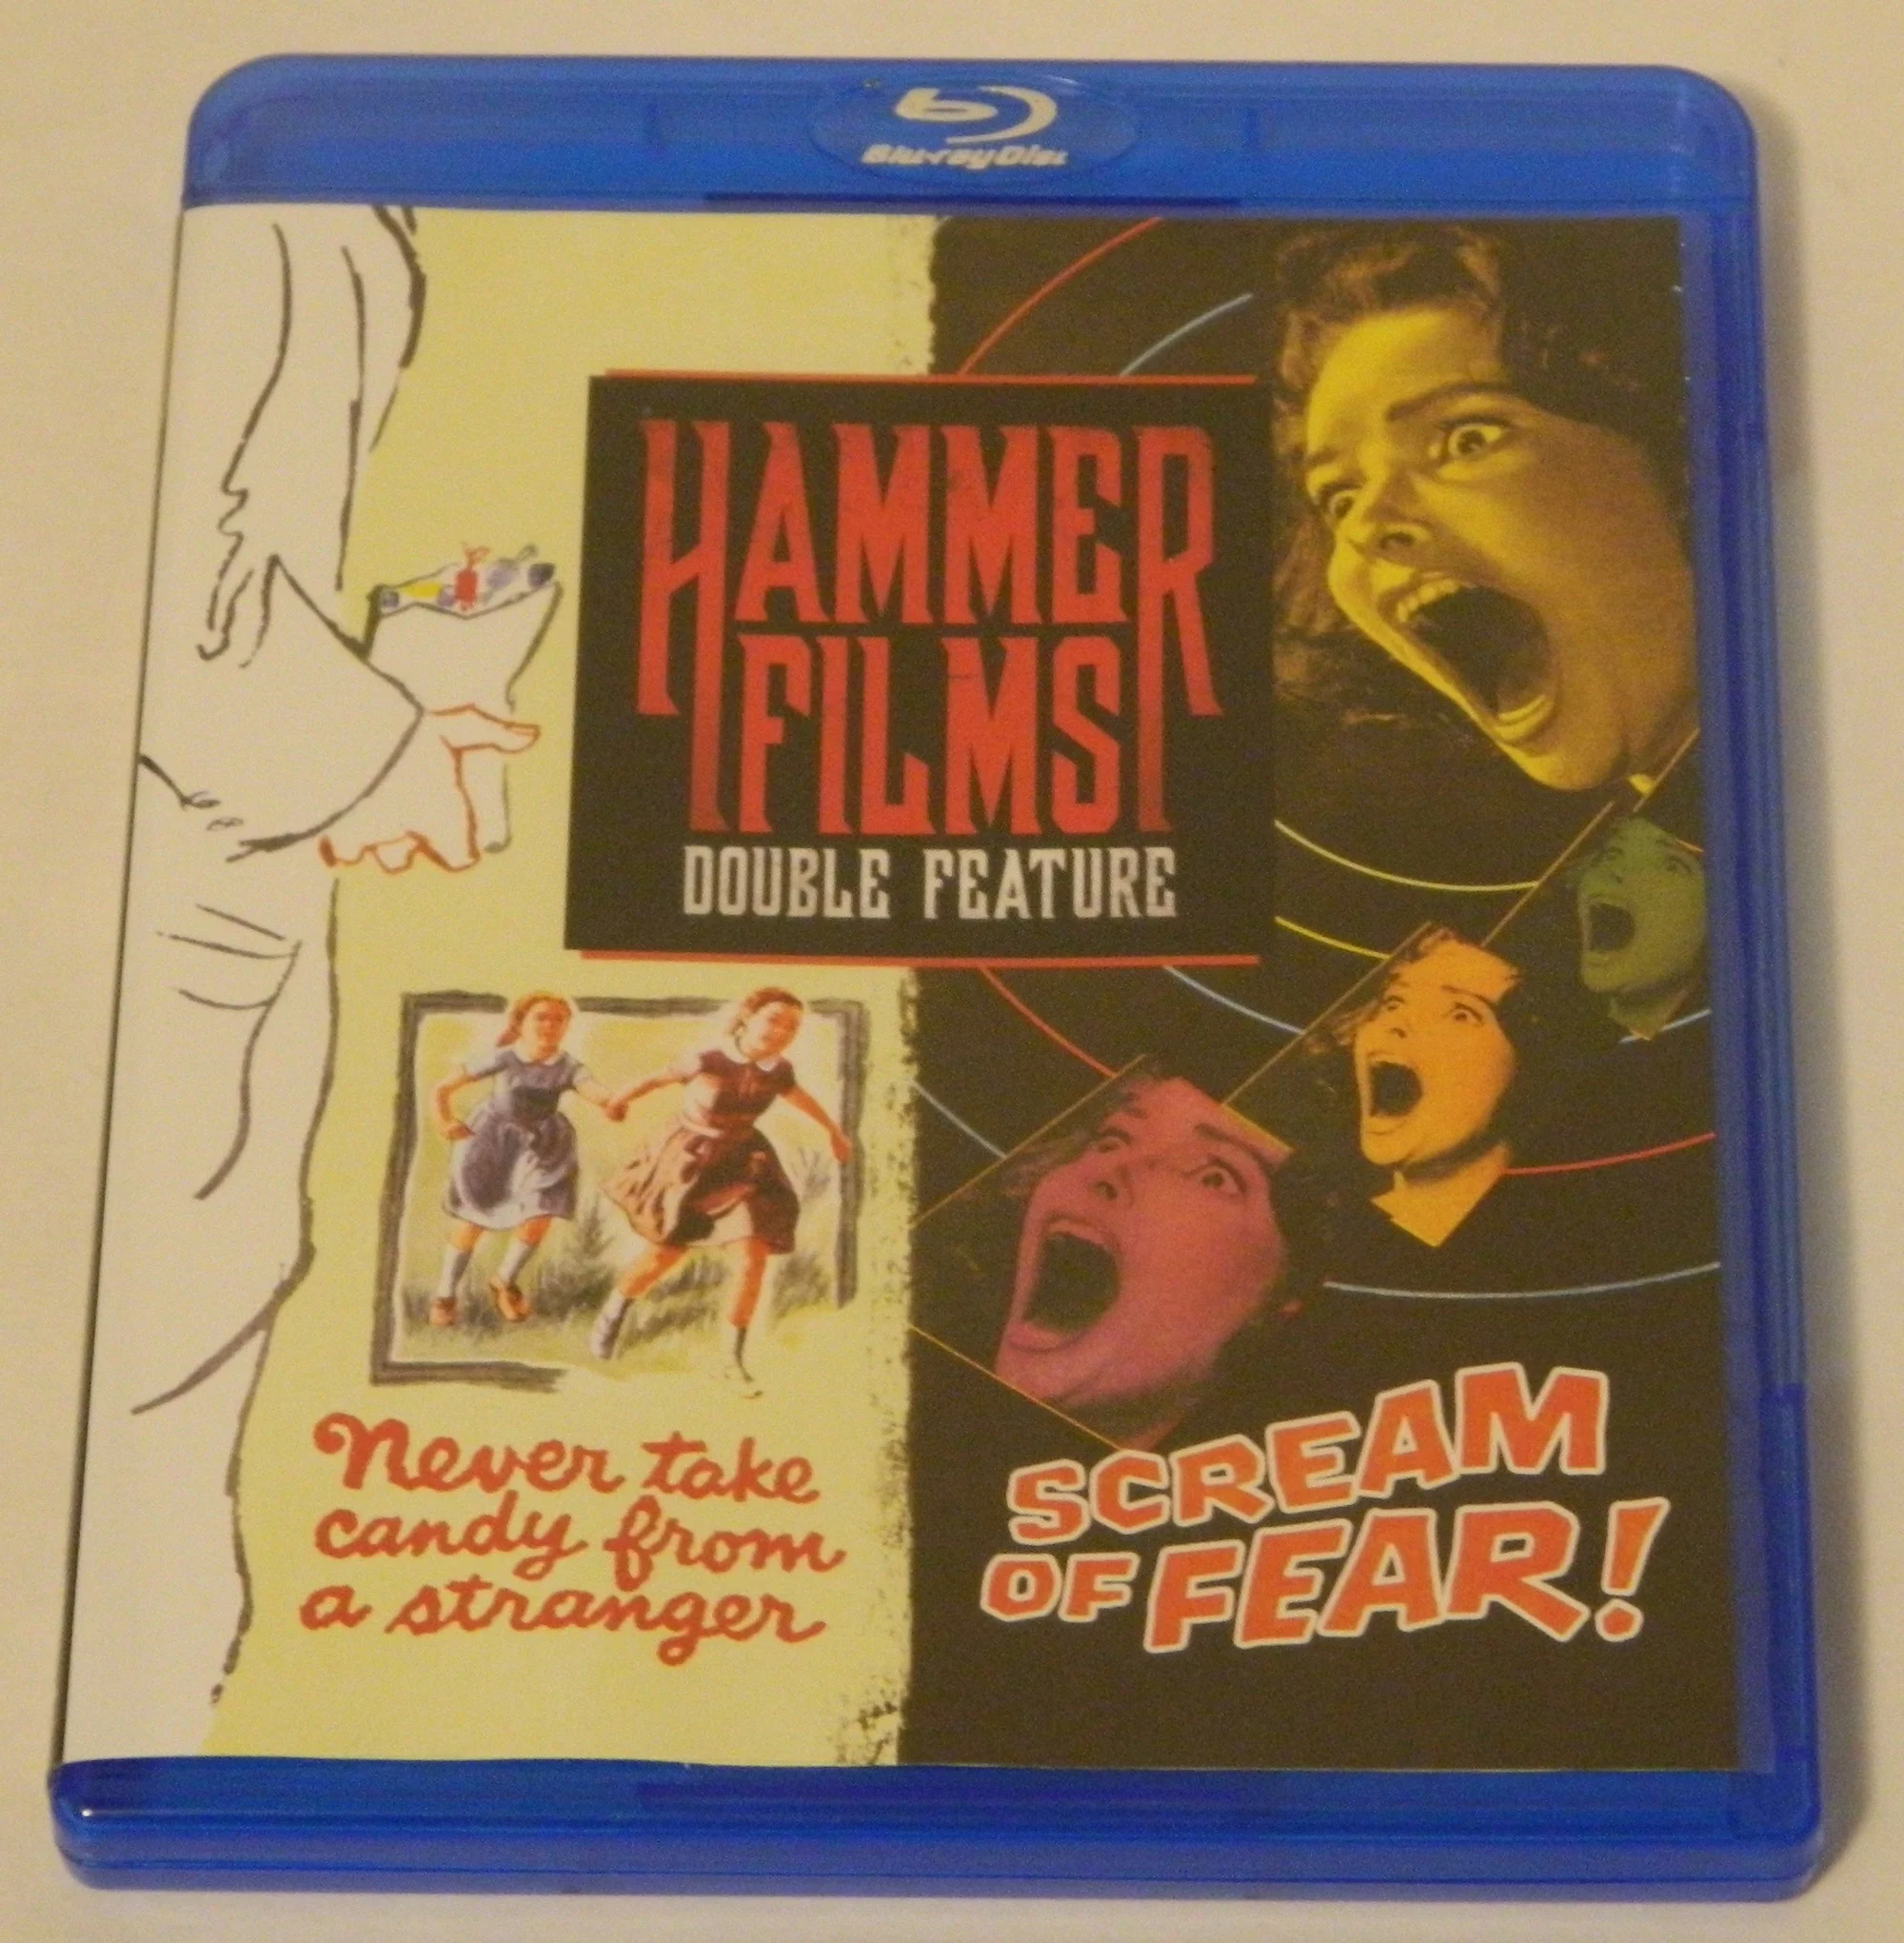 Hammer Films Double Feature Never Take Candy From a Stranger Blu-ray